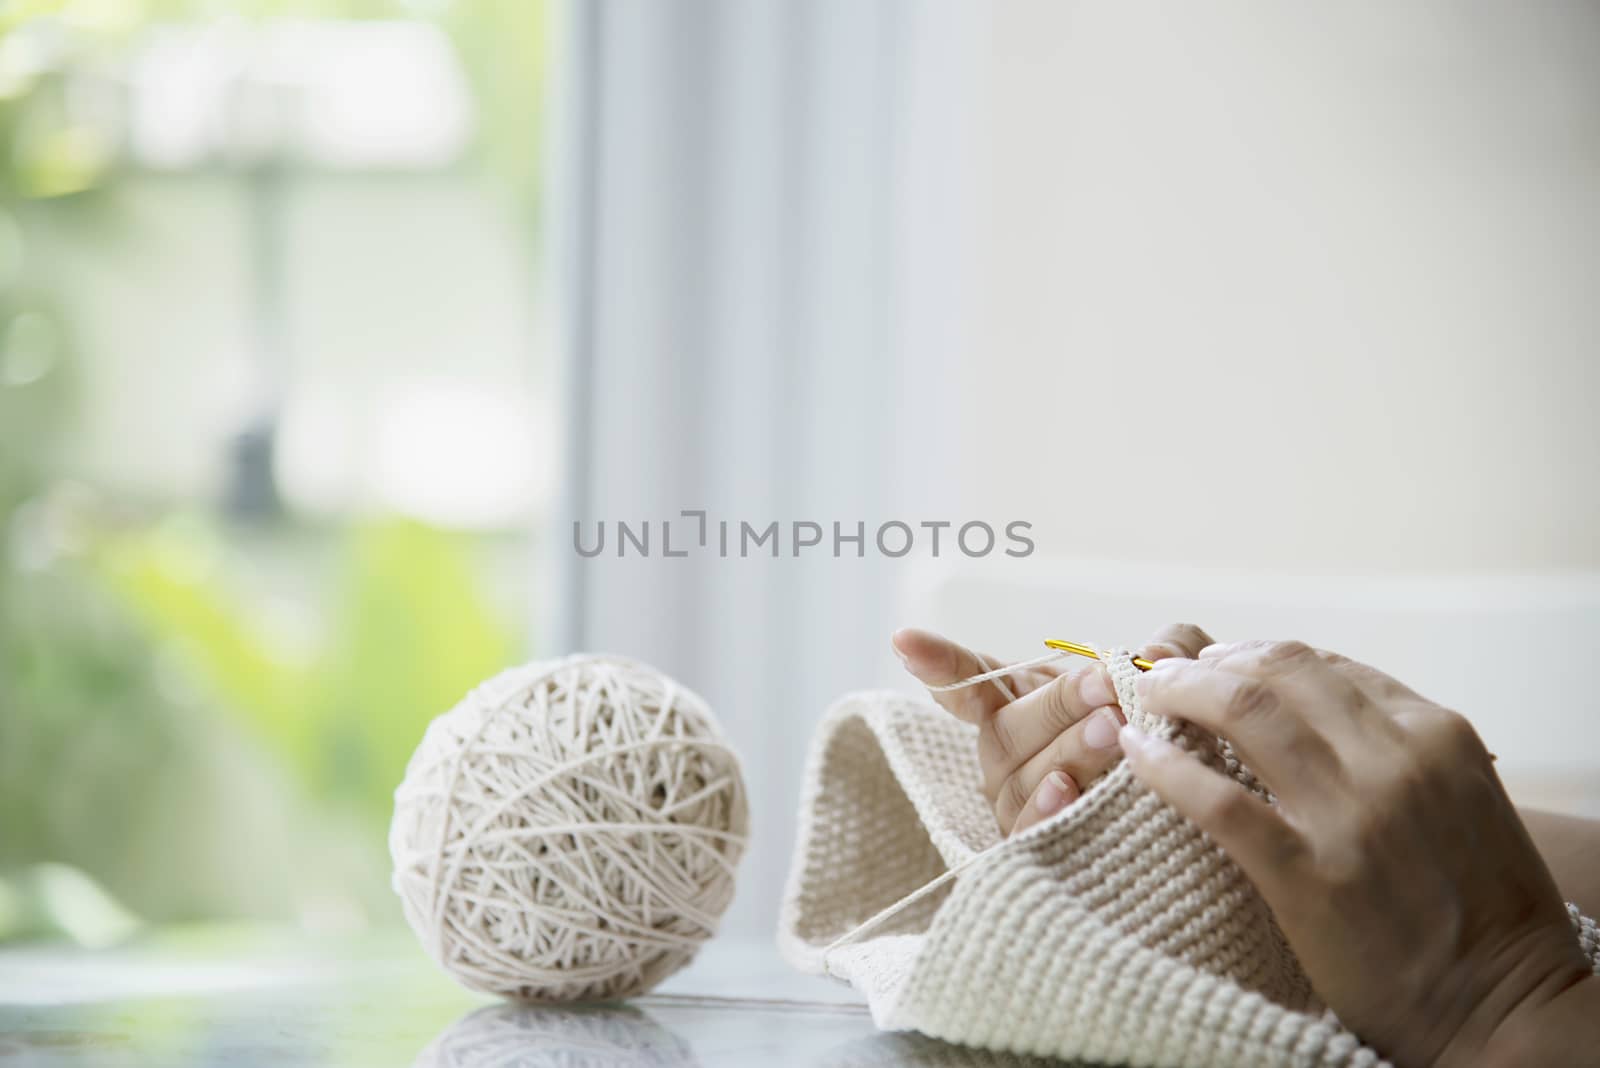 Woman's hands doing home knitting work - people with DIY work at home concept by pairhandmade